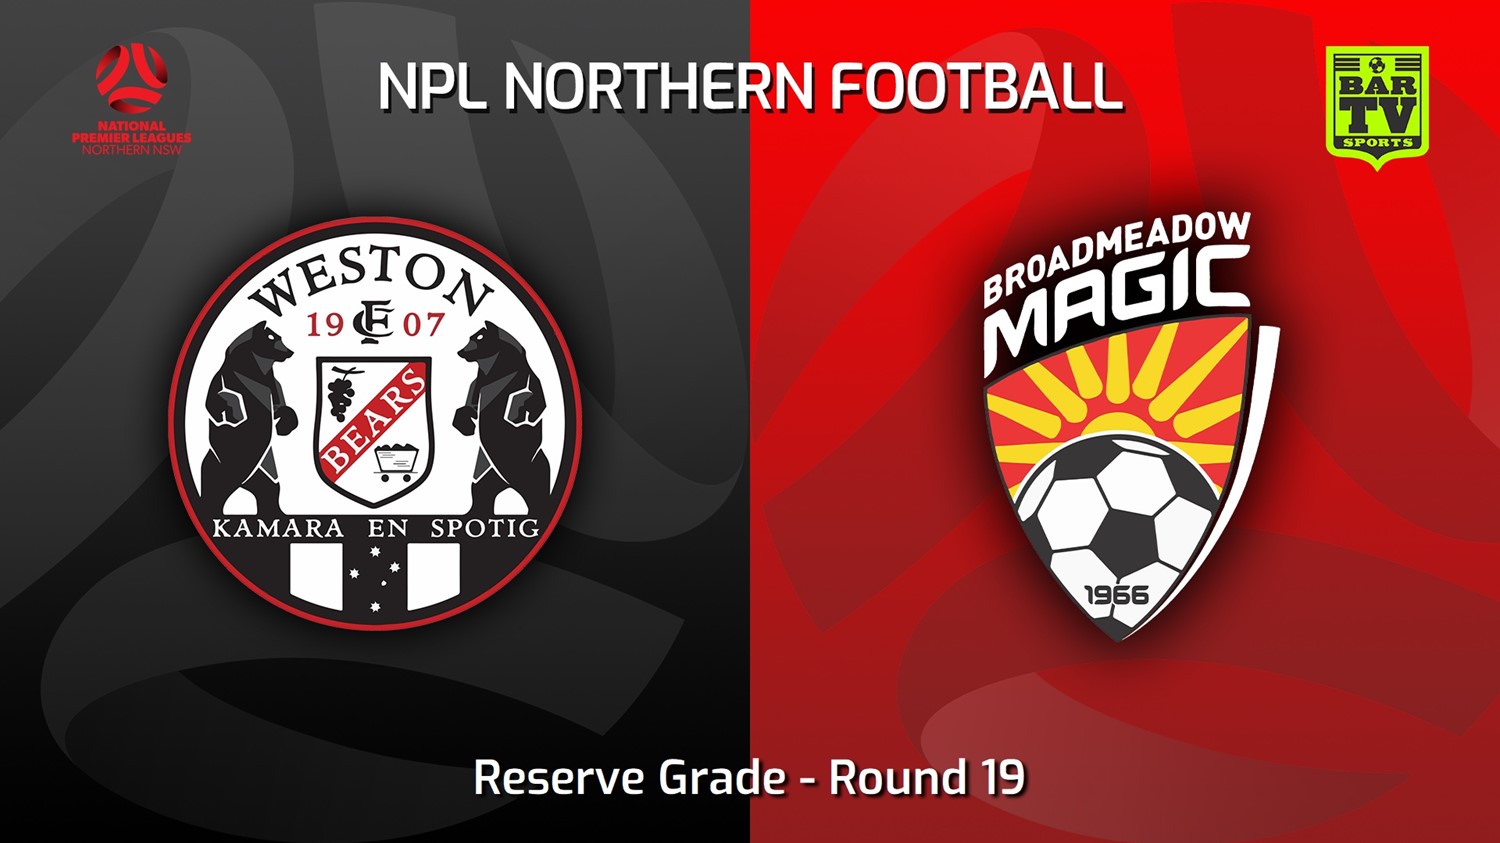 220716-NNSW NPLM Res Round 19 - Weston Workers FC Res v Broadmeadow Magic Res Minigame Slate Image